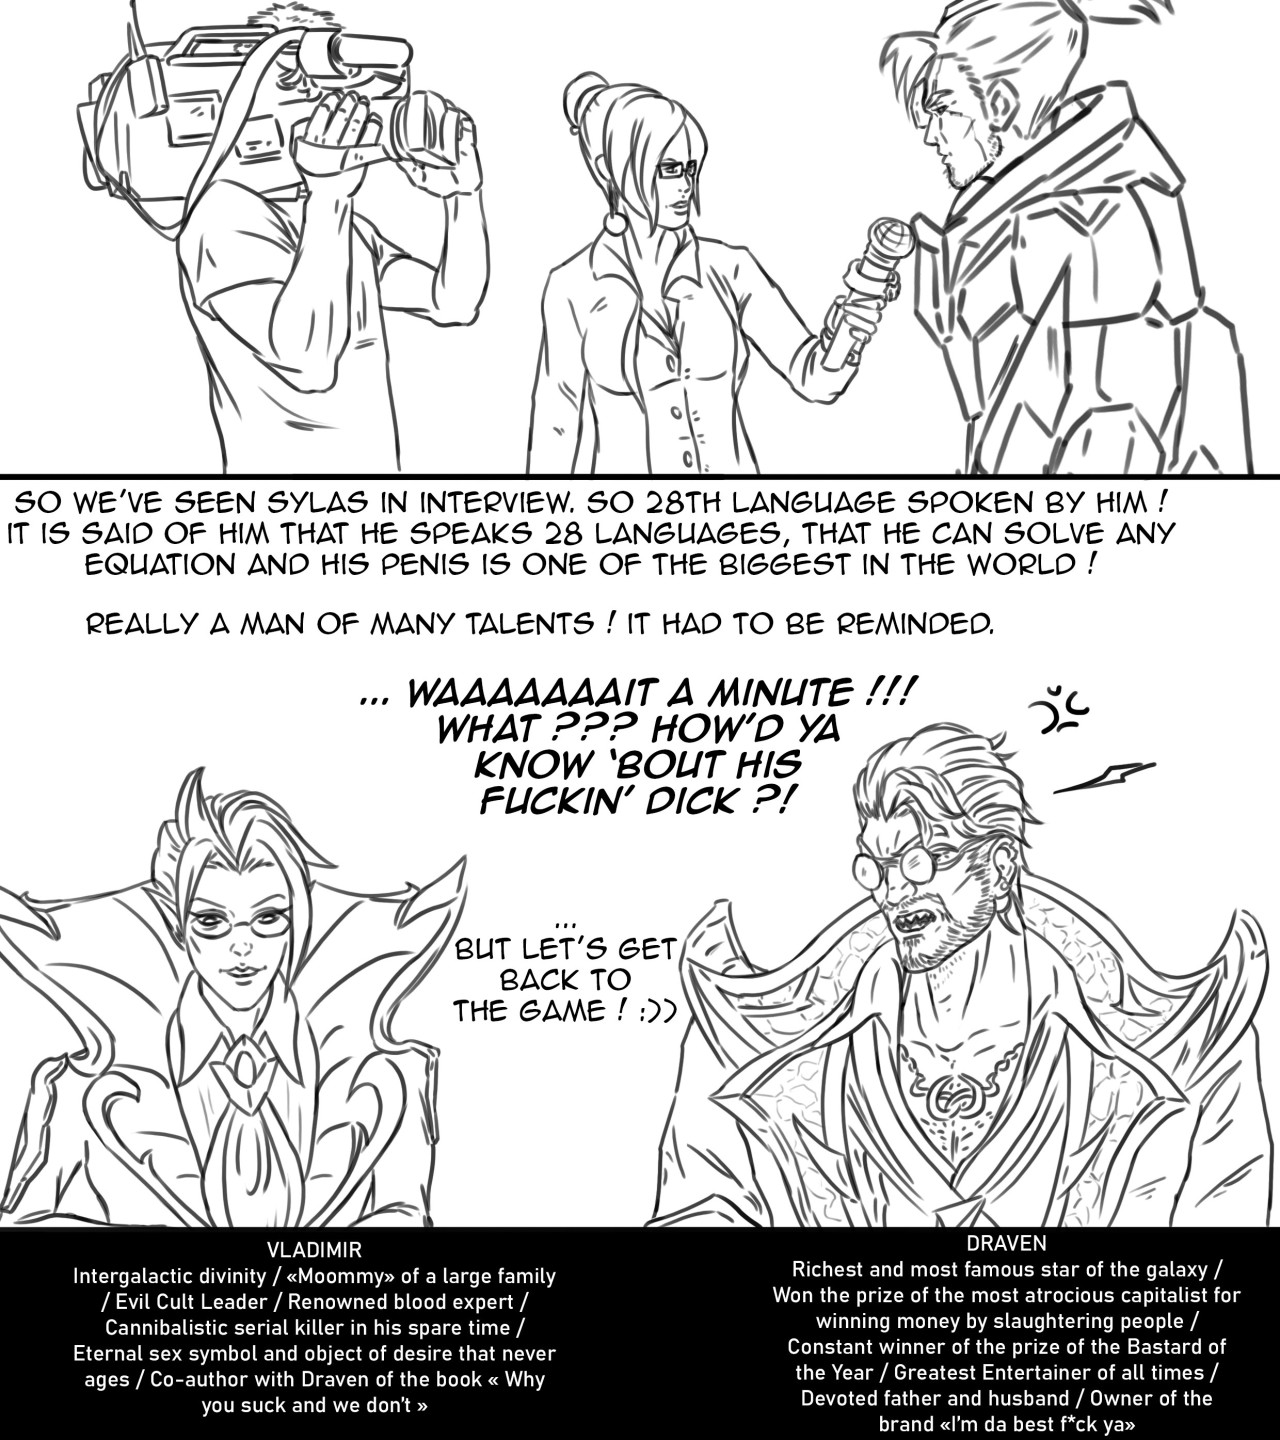 Cafe cuties Vladimir and Debonair Draven casters  Also featuring Forecast Janna and Project Sylas. Very old comic I needed to draw inspired by a duo of streamers #League of Legends  #LoL League of Legends #draven #draven league of legends #draven lol#debonair draven#cafe cuties #cafe cuties vladimir #vladimir lol #vladimir league of legends  #draven x vladimir #dravimir#janna forecast#sylas #sylas league of legends #project sylas#comic#funny#memes#lol fanart #league of fanart #fanart#art